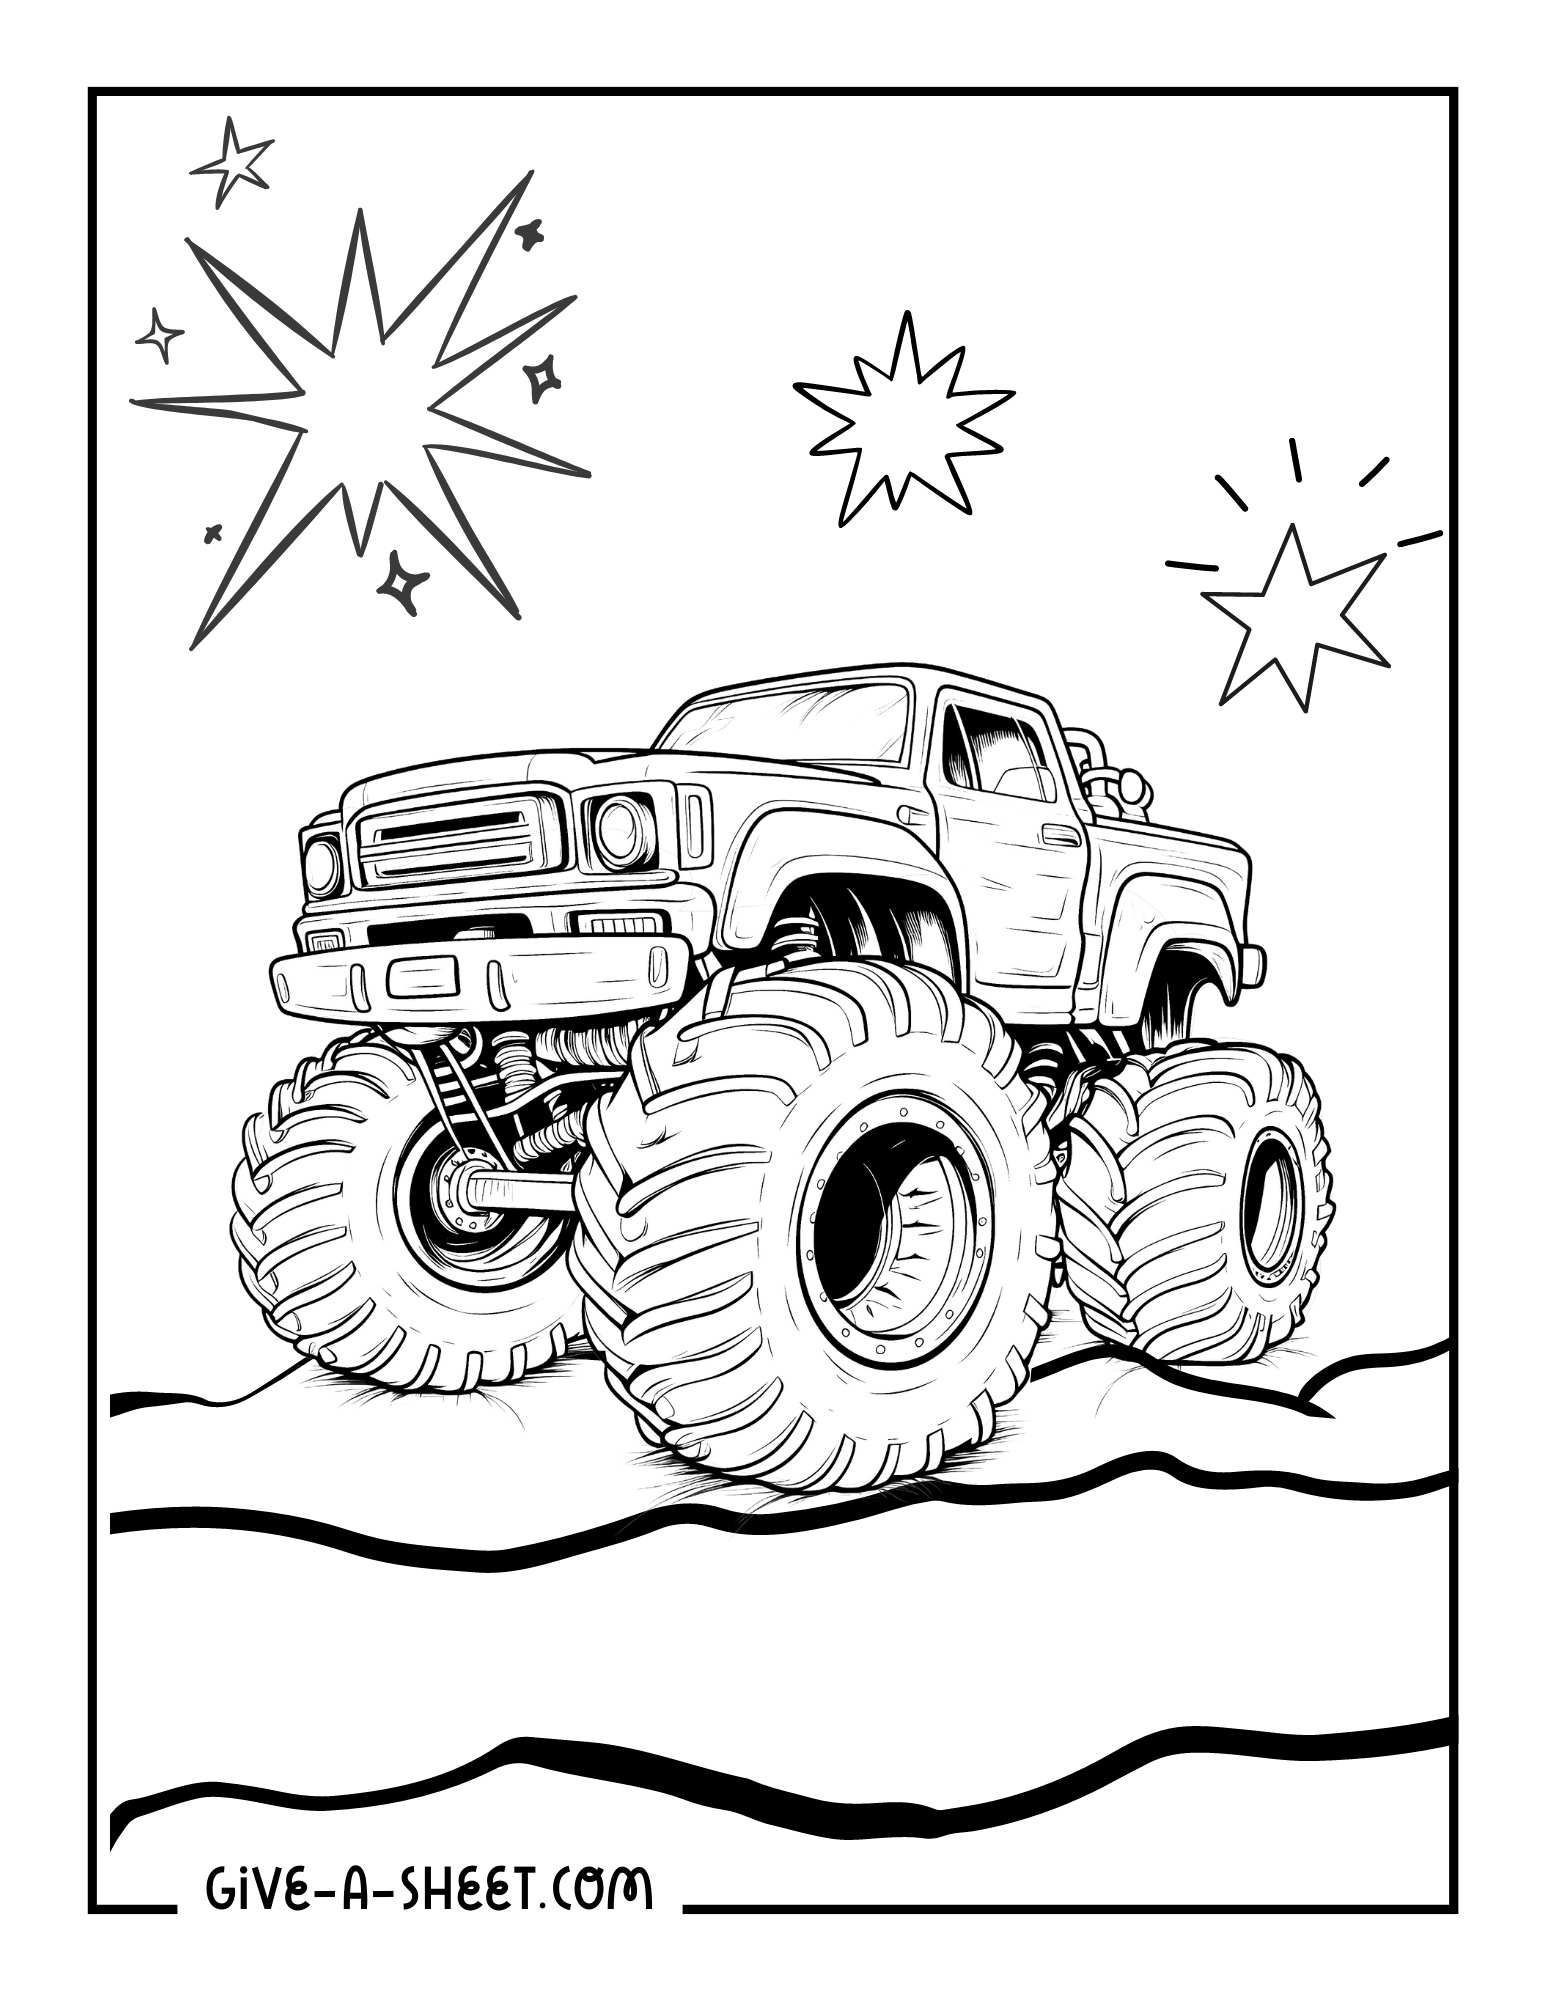 Monster jams feld entertainment truck coloring page.